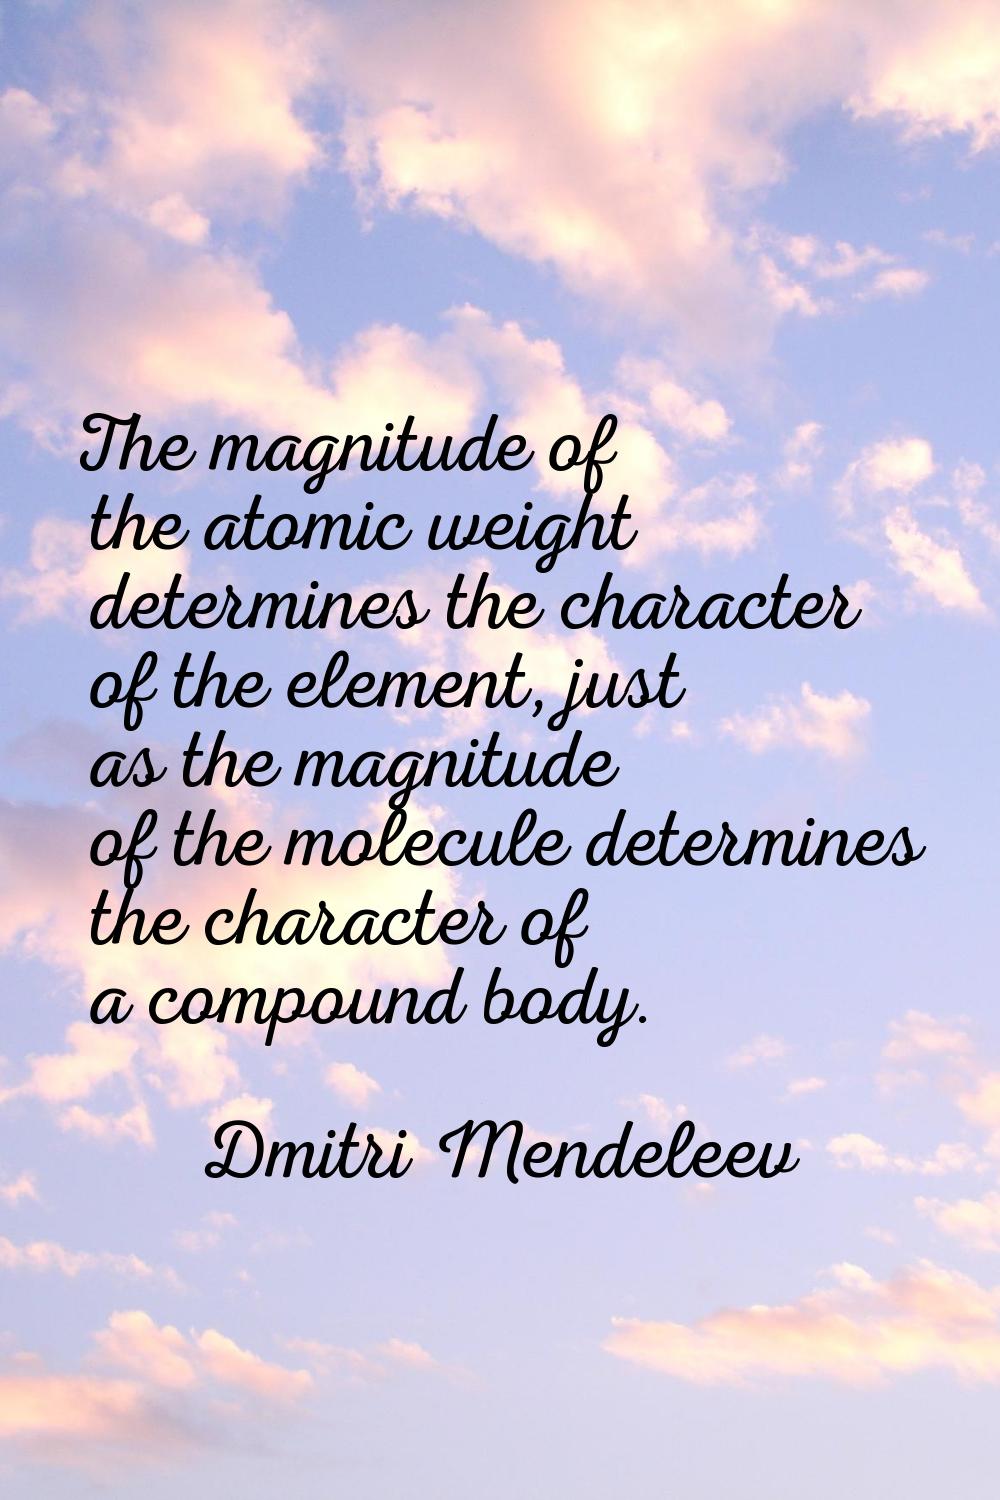 The magnitude of the atomic weight determines the character of the element, just as the magnitude o